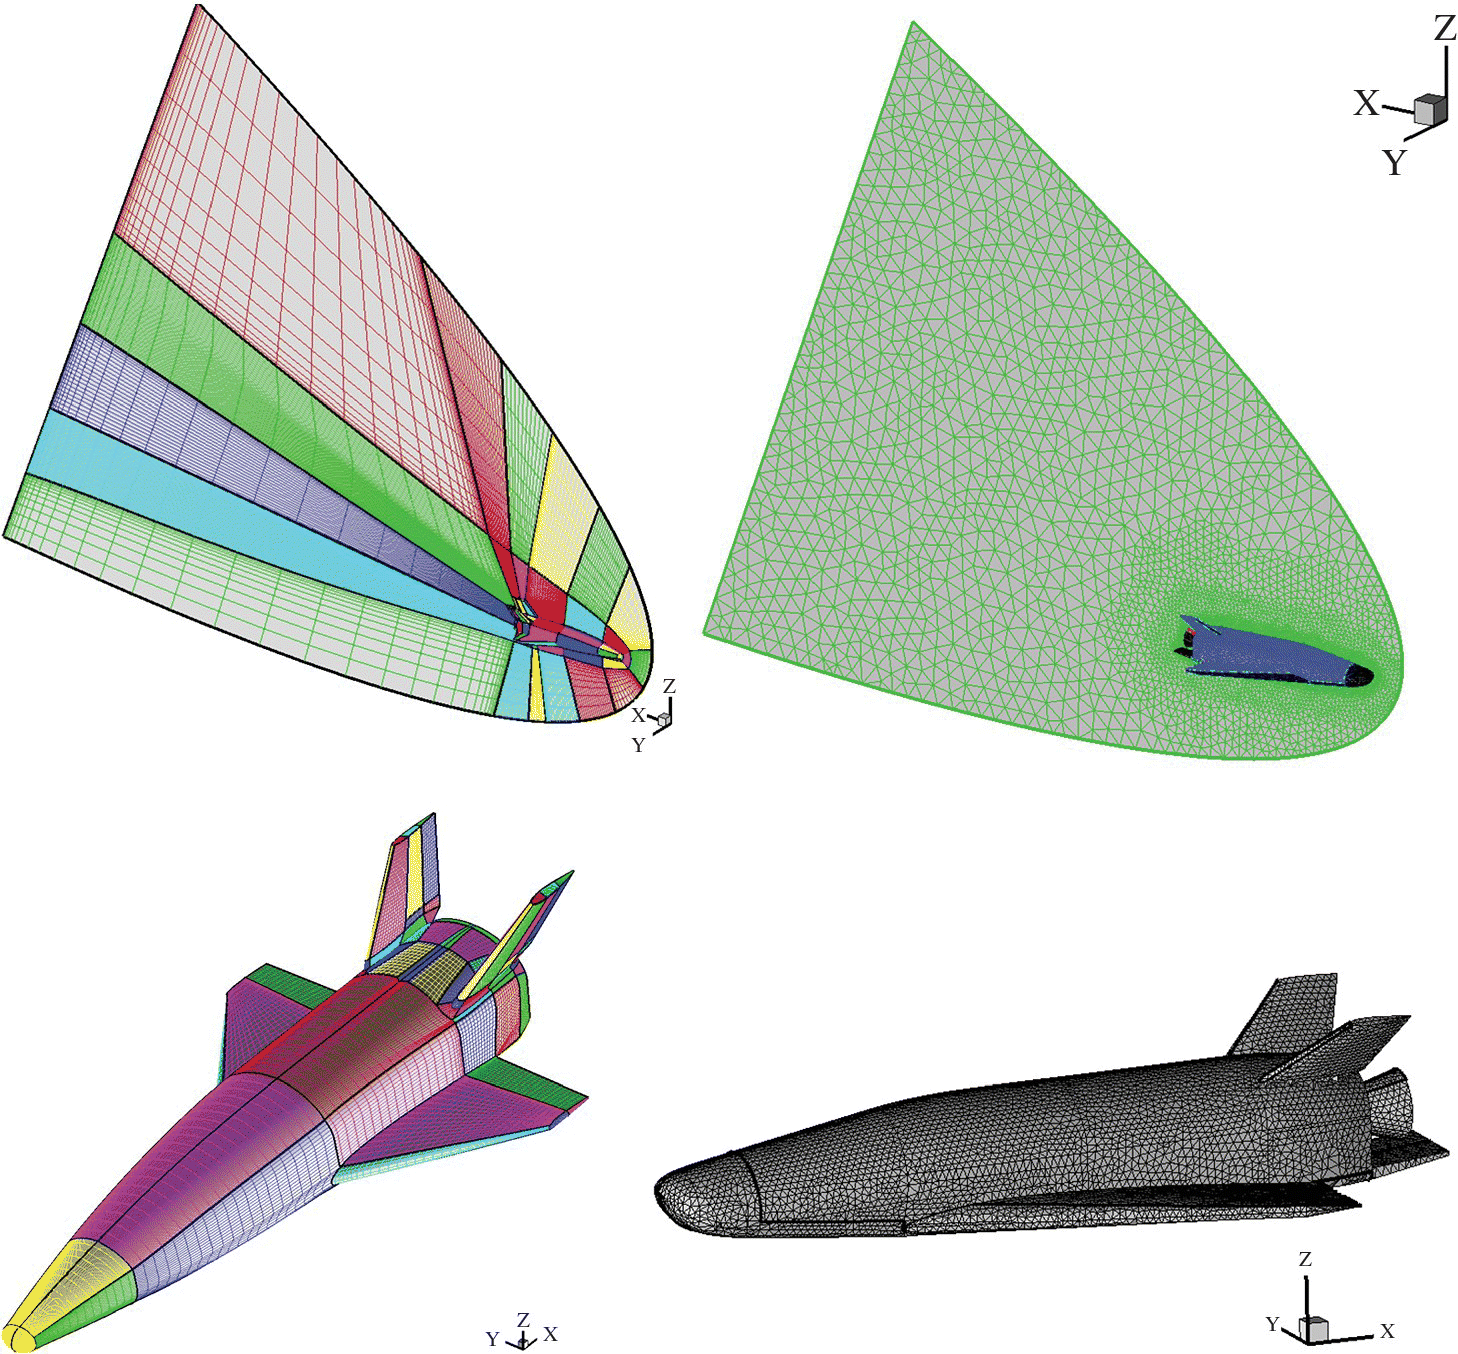 3D images of sup‐hypersonic computational domain: mesh on symmetry plane and vehicle surface.